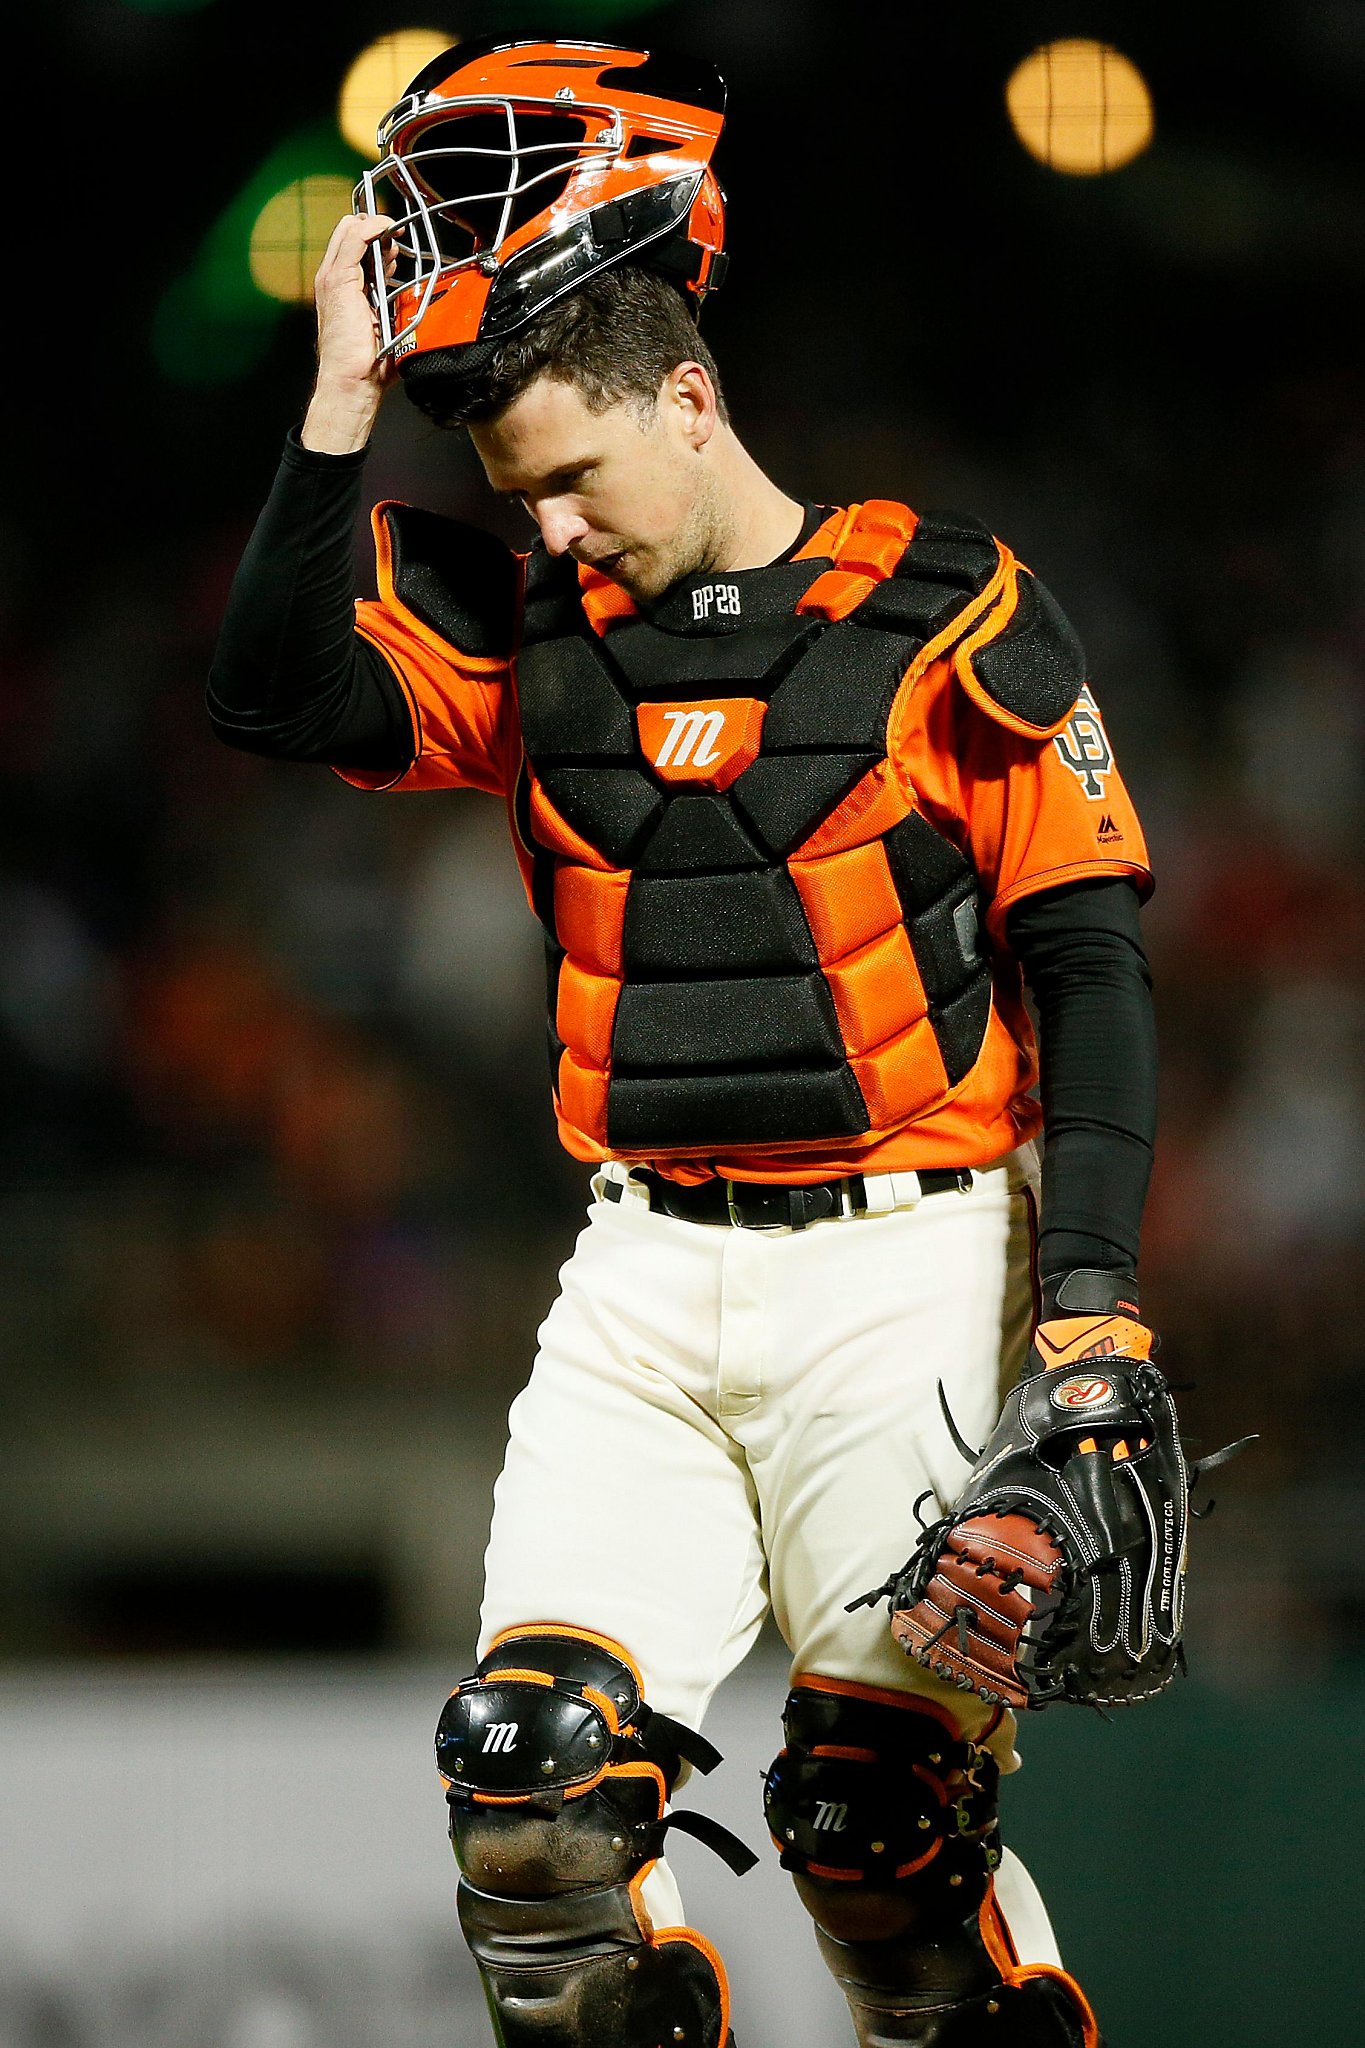 Buster Posey uncorked a literal perfect throw last night, and social media  loved it